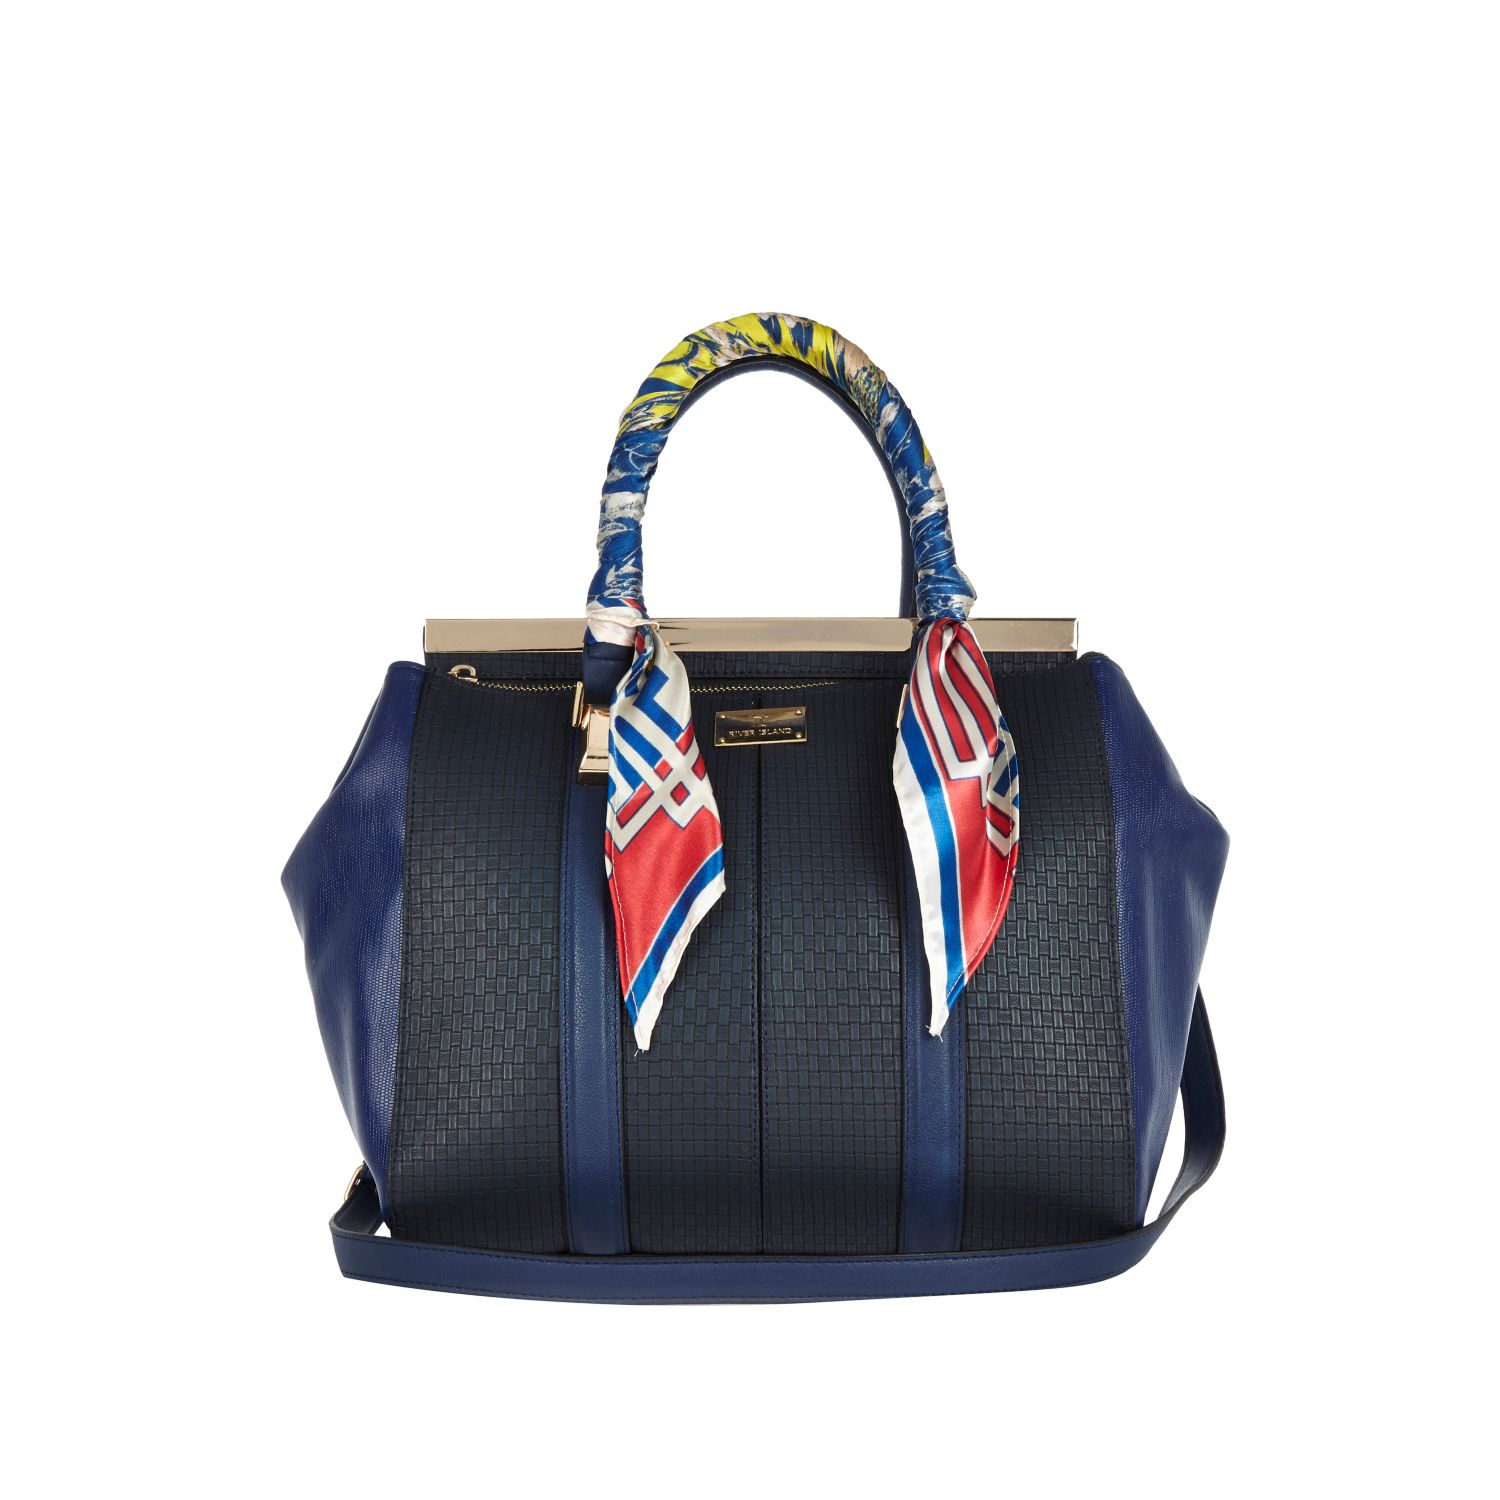 River Island Navy Scarf Handle Woven Tote Bag in Blue (navy) | Lyst